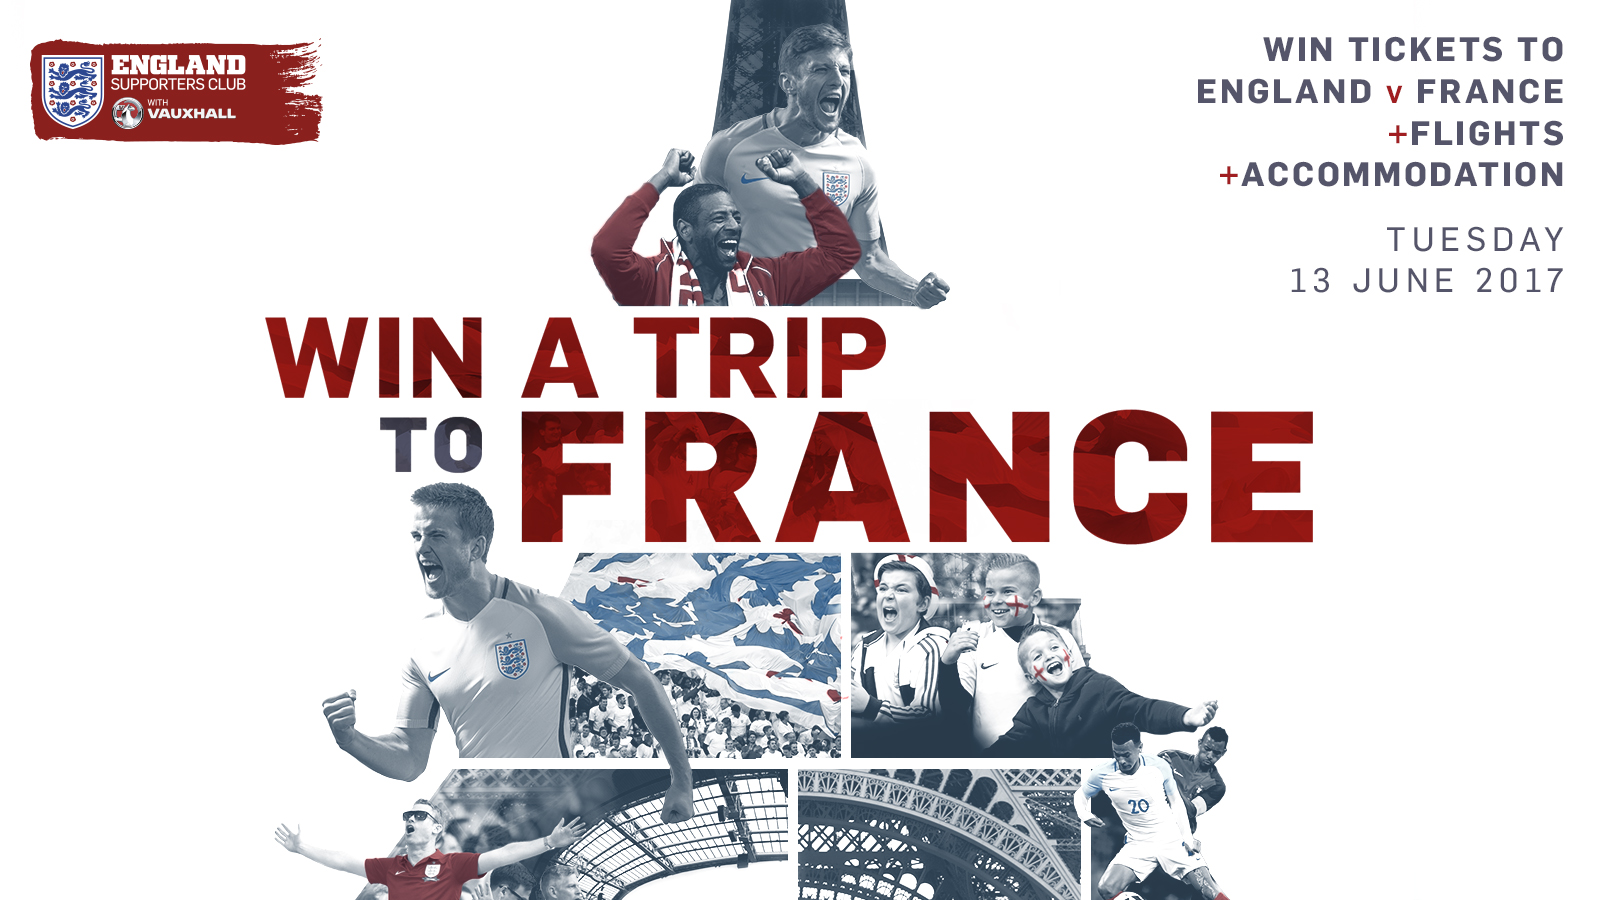 Win a trip to France including tickets, flights and